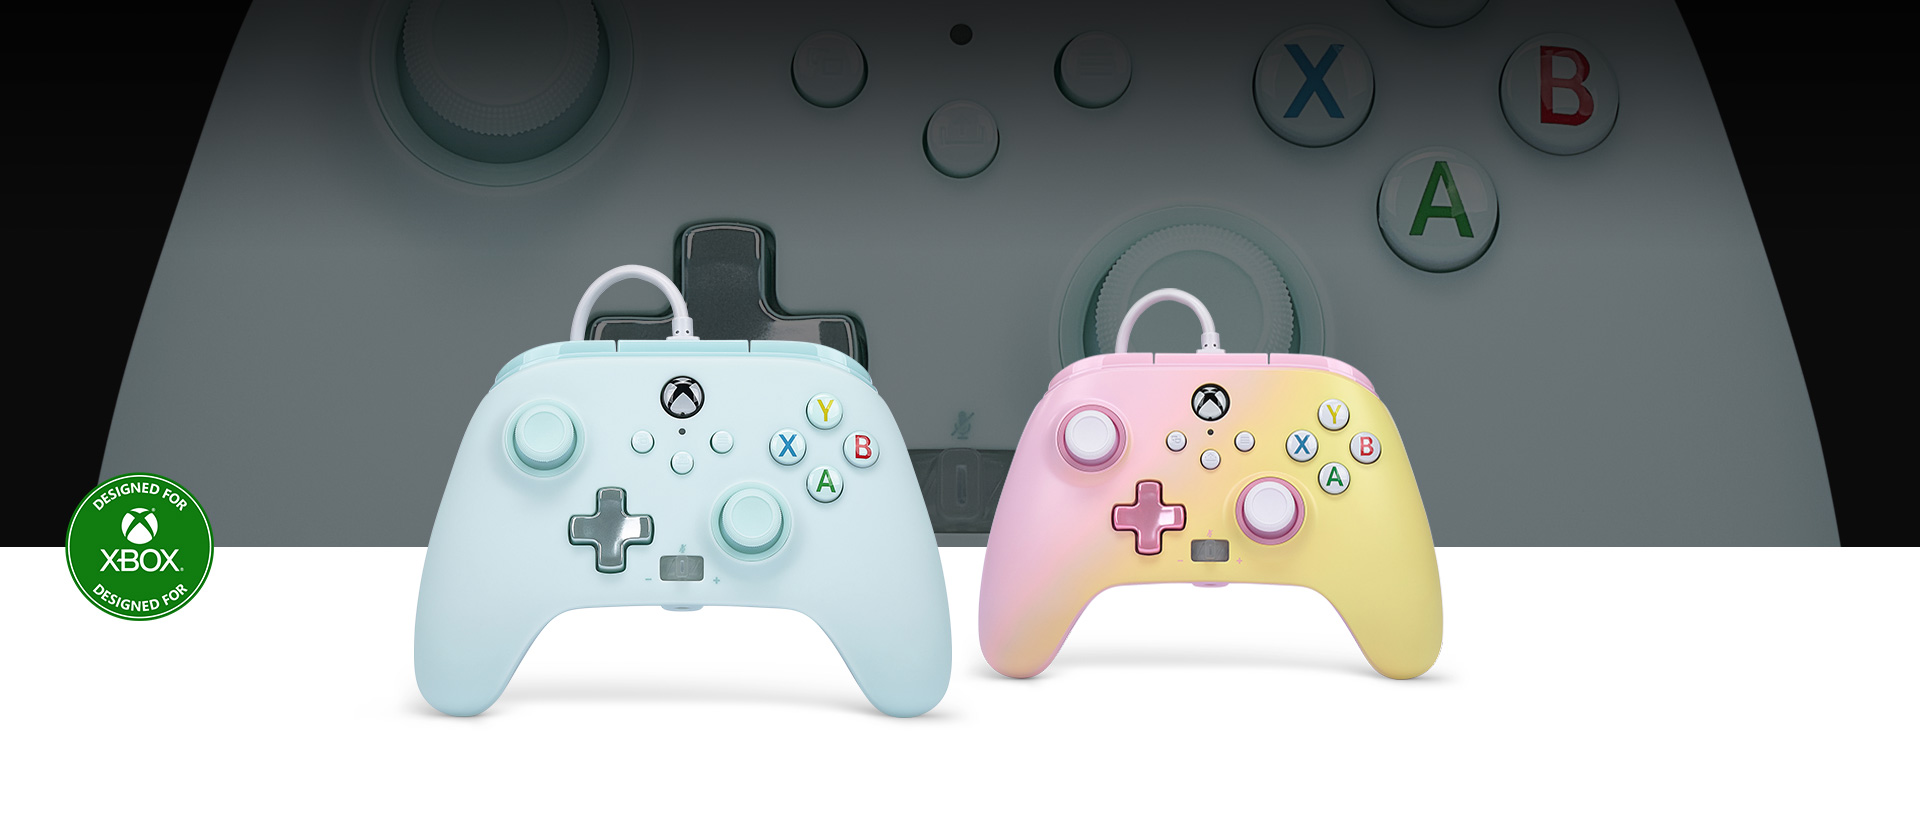 Designed for Xbox logo, Cotton Candy Blue controller in front with the Pink Lemonade controller beside it